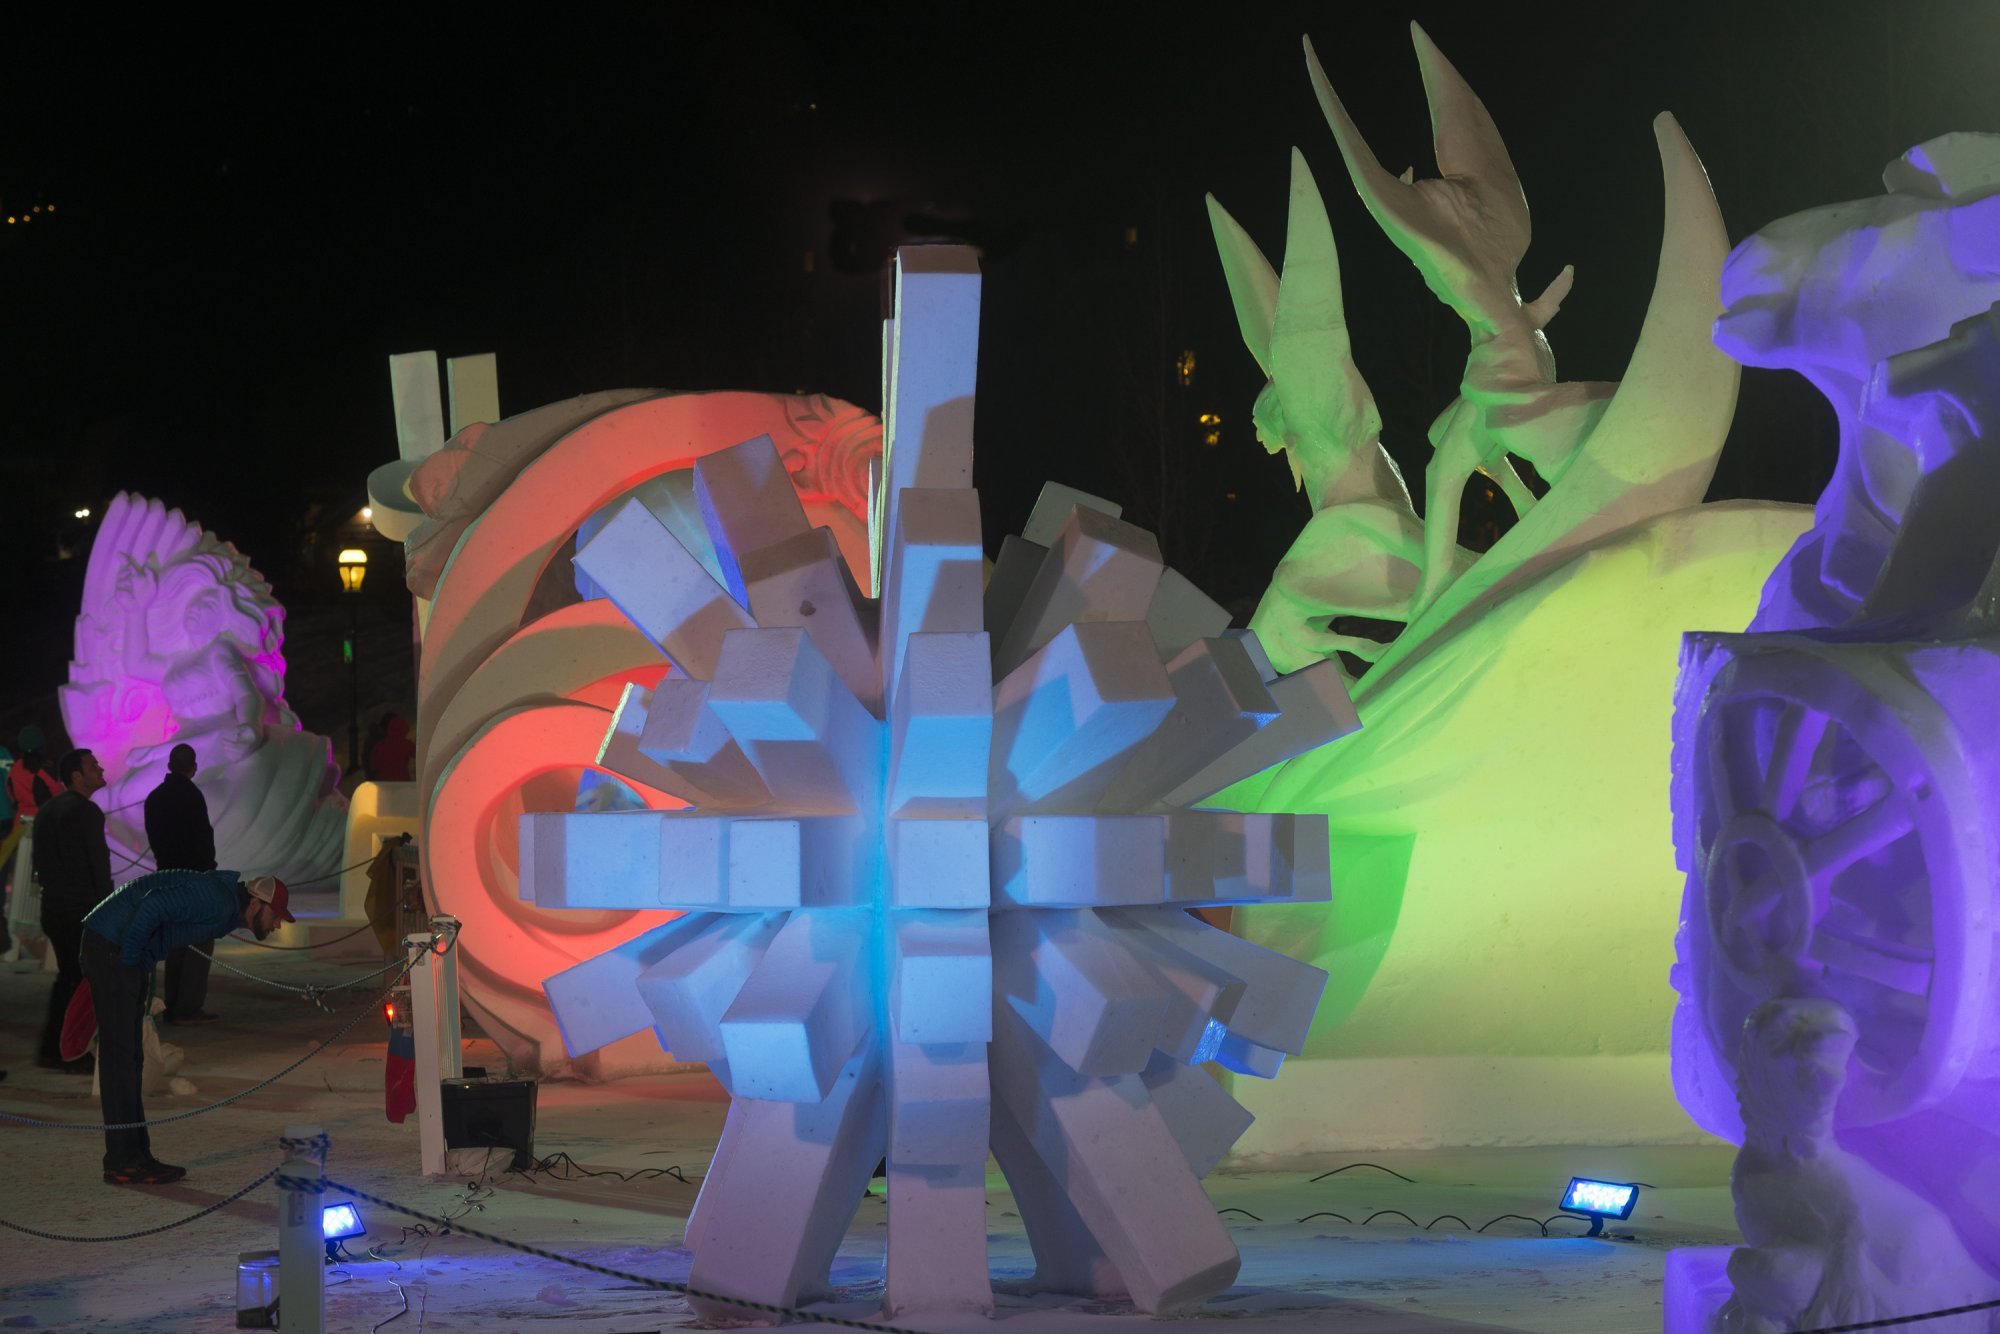 Sculptures lit at night during the International Snow Sculpture Championships